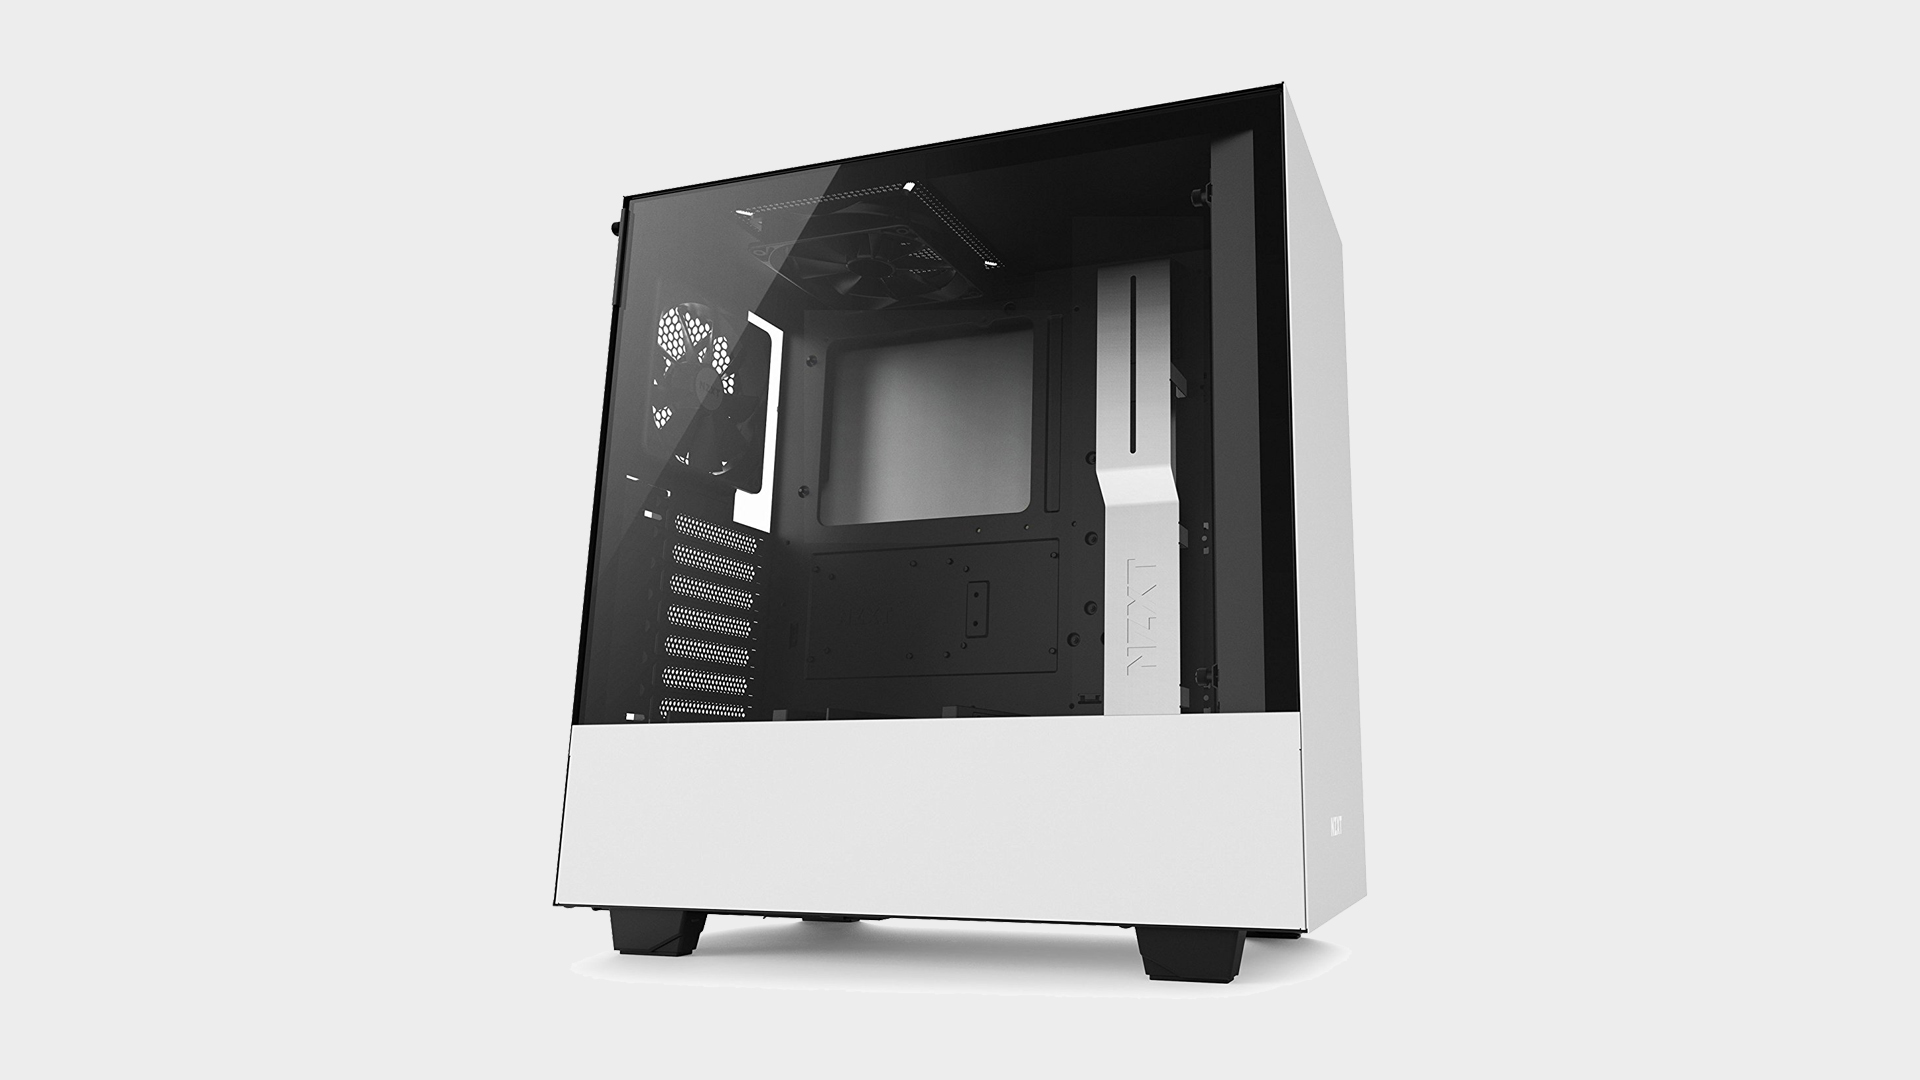 NZXT H510 chassis shot from the side on a blank background